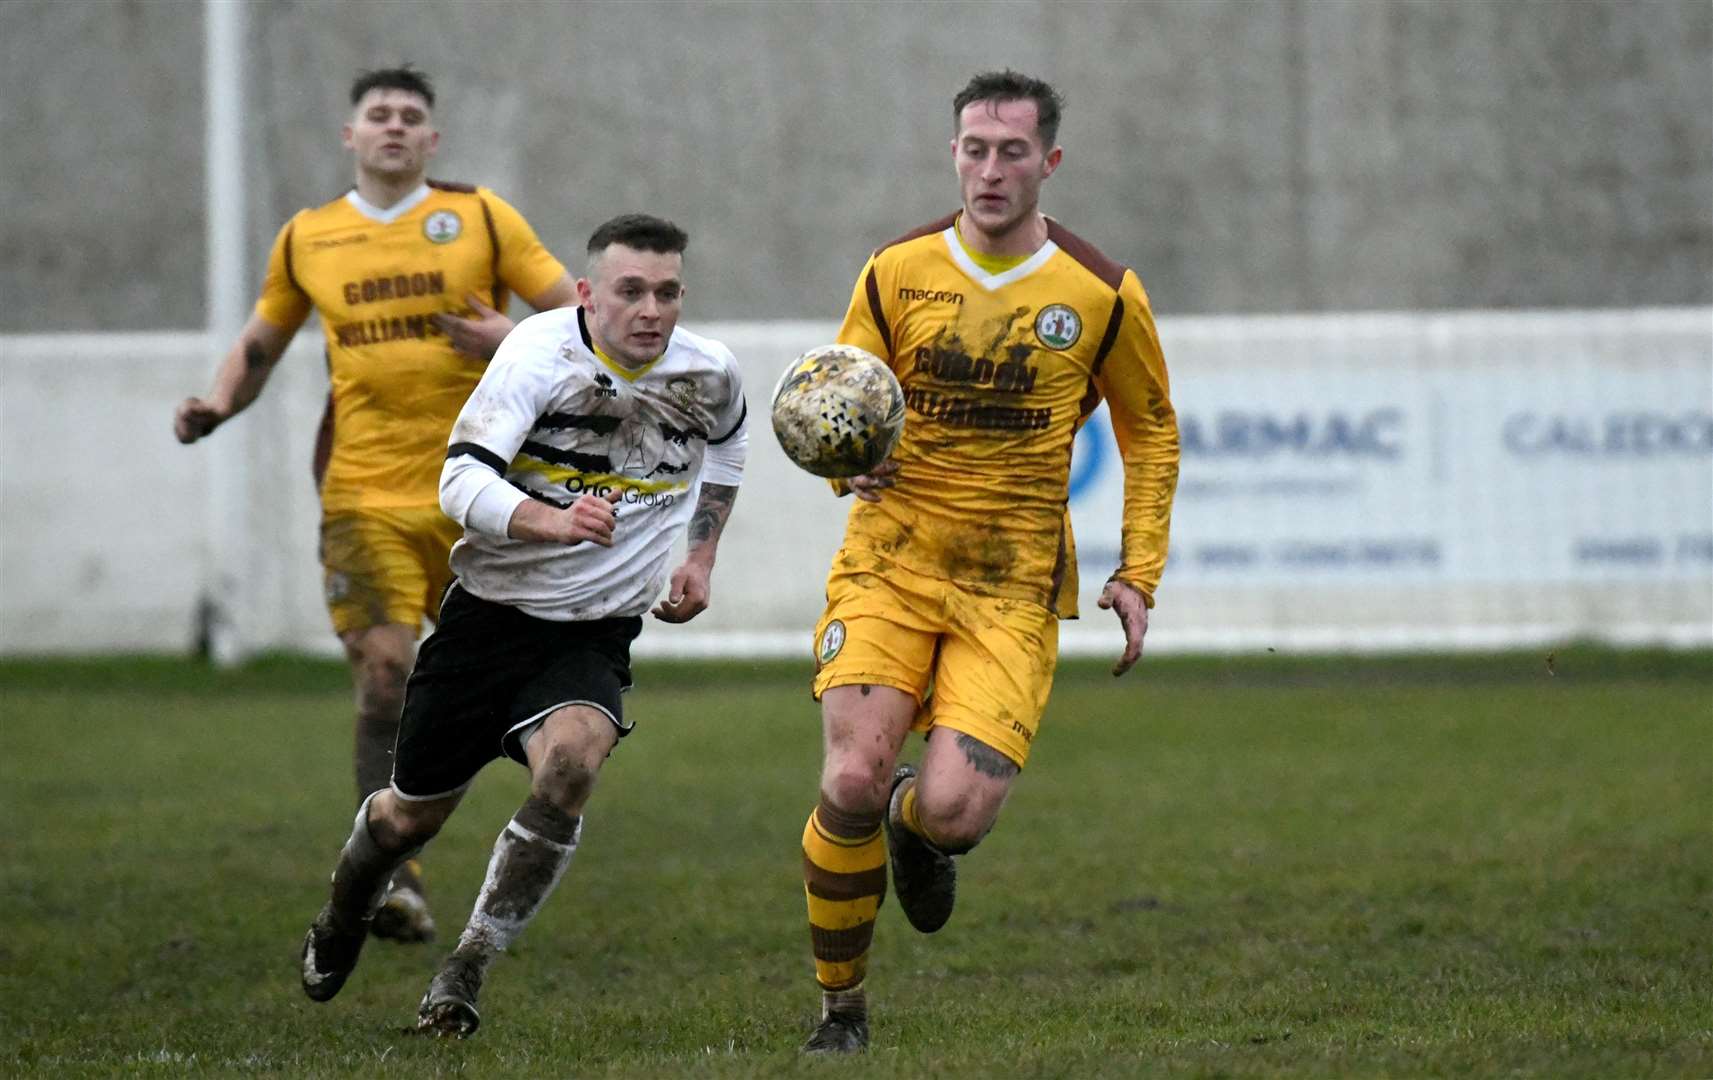 Shaun Sutherland, Clachnacuddin FC and Dale Wood, Forres Mechanics FC. Picture: James Mackenzie.